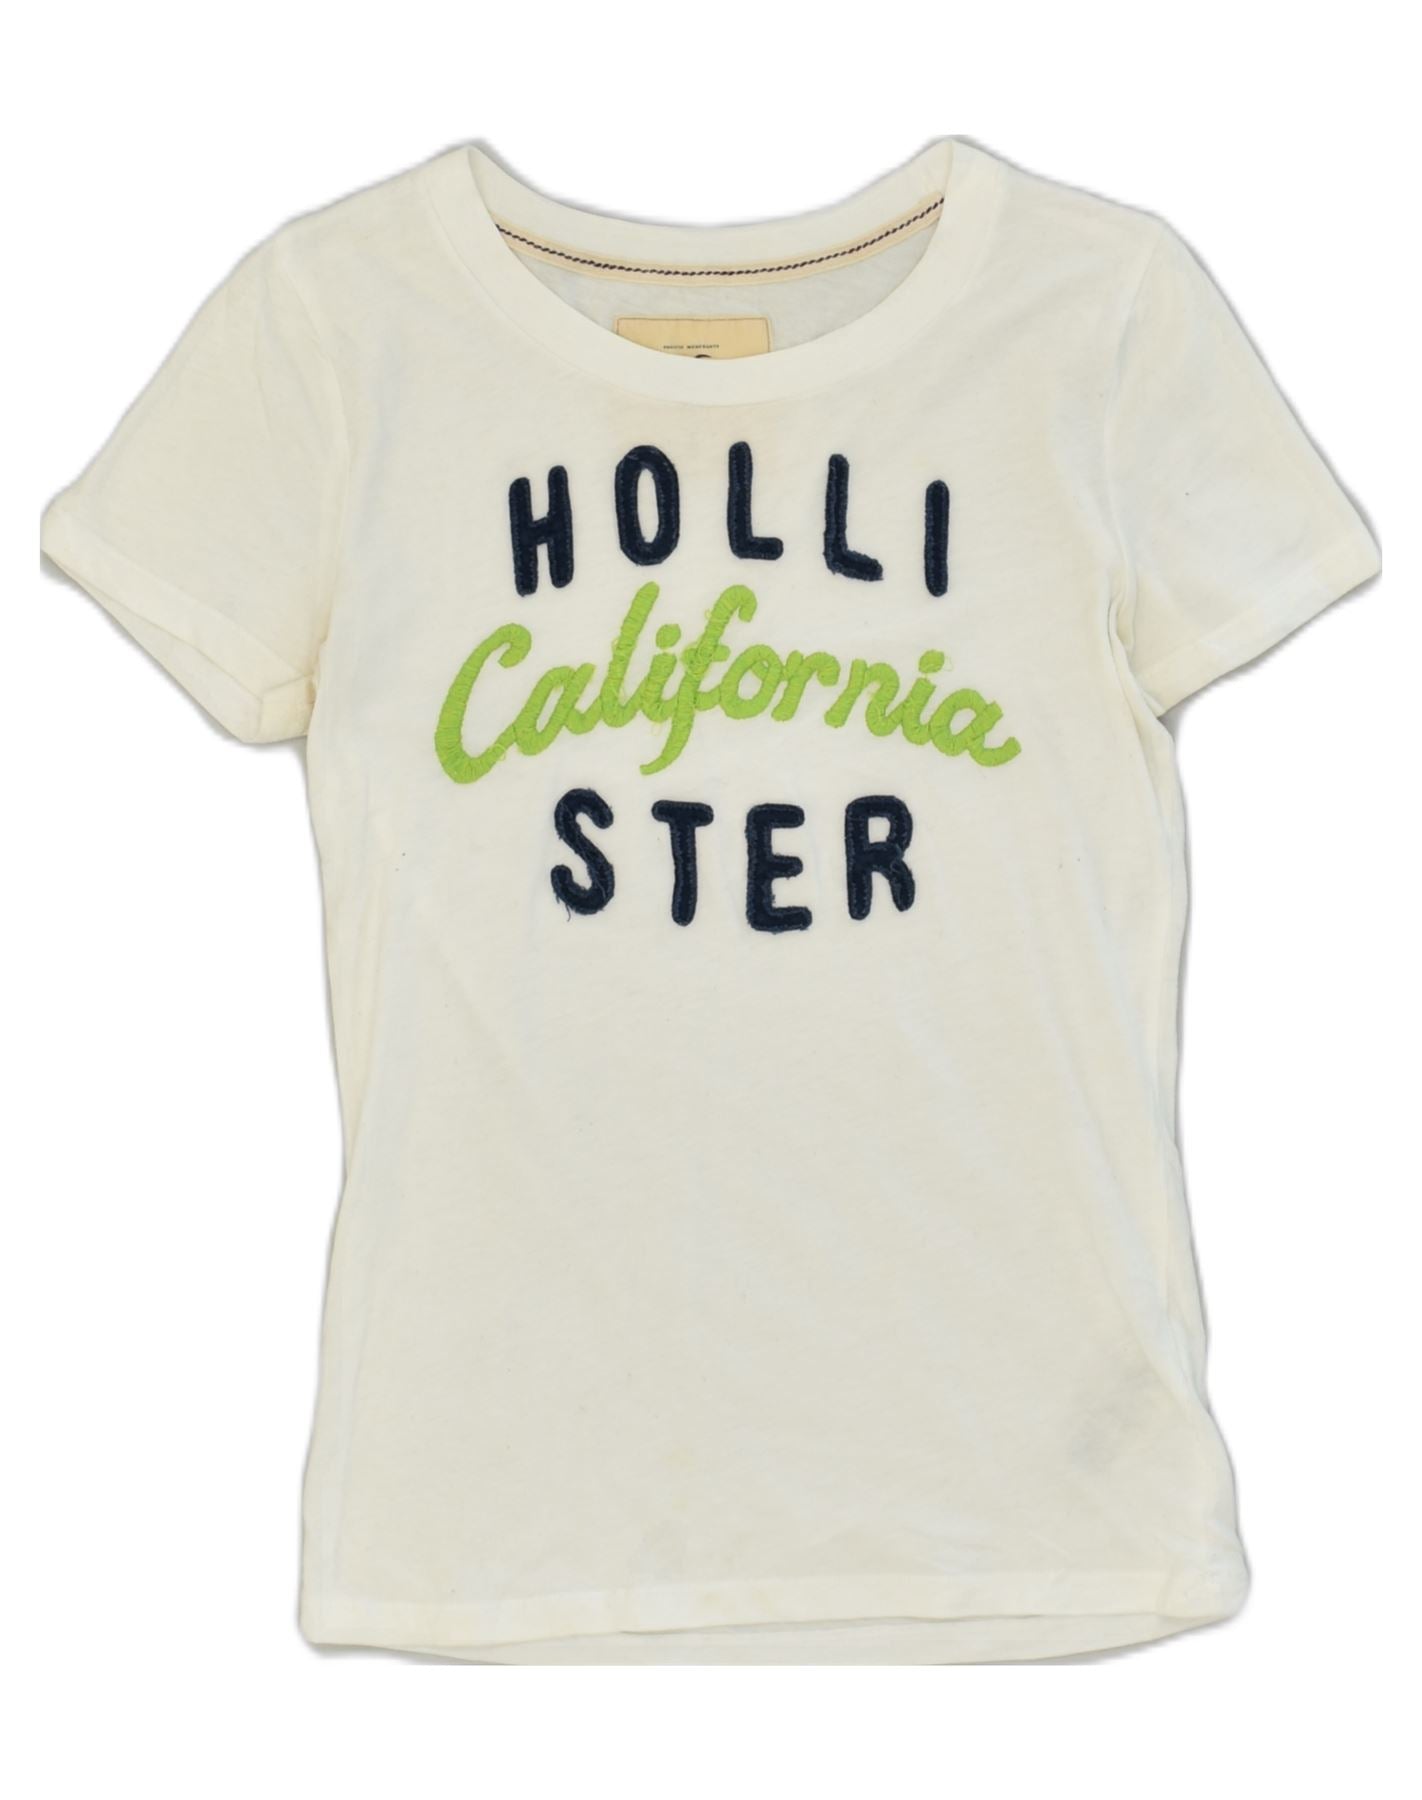 HOLLISTER Girls Graphic T-Shirt Top 10-11 Years Medium White Cotton, Vintage & Second-Hand Clothing Online